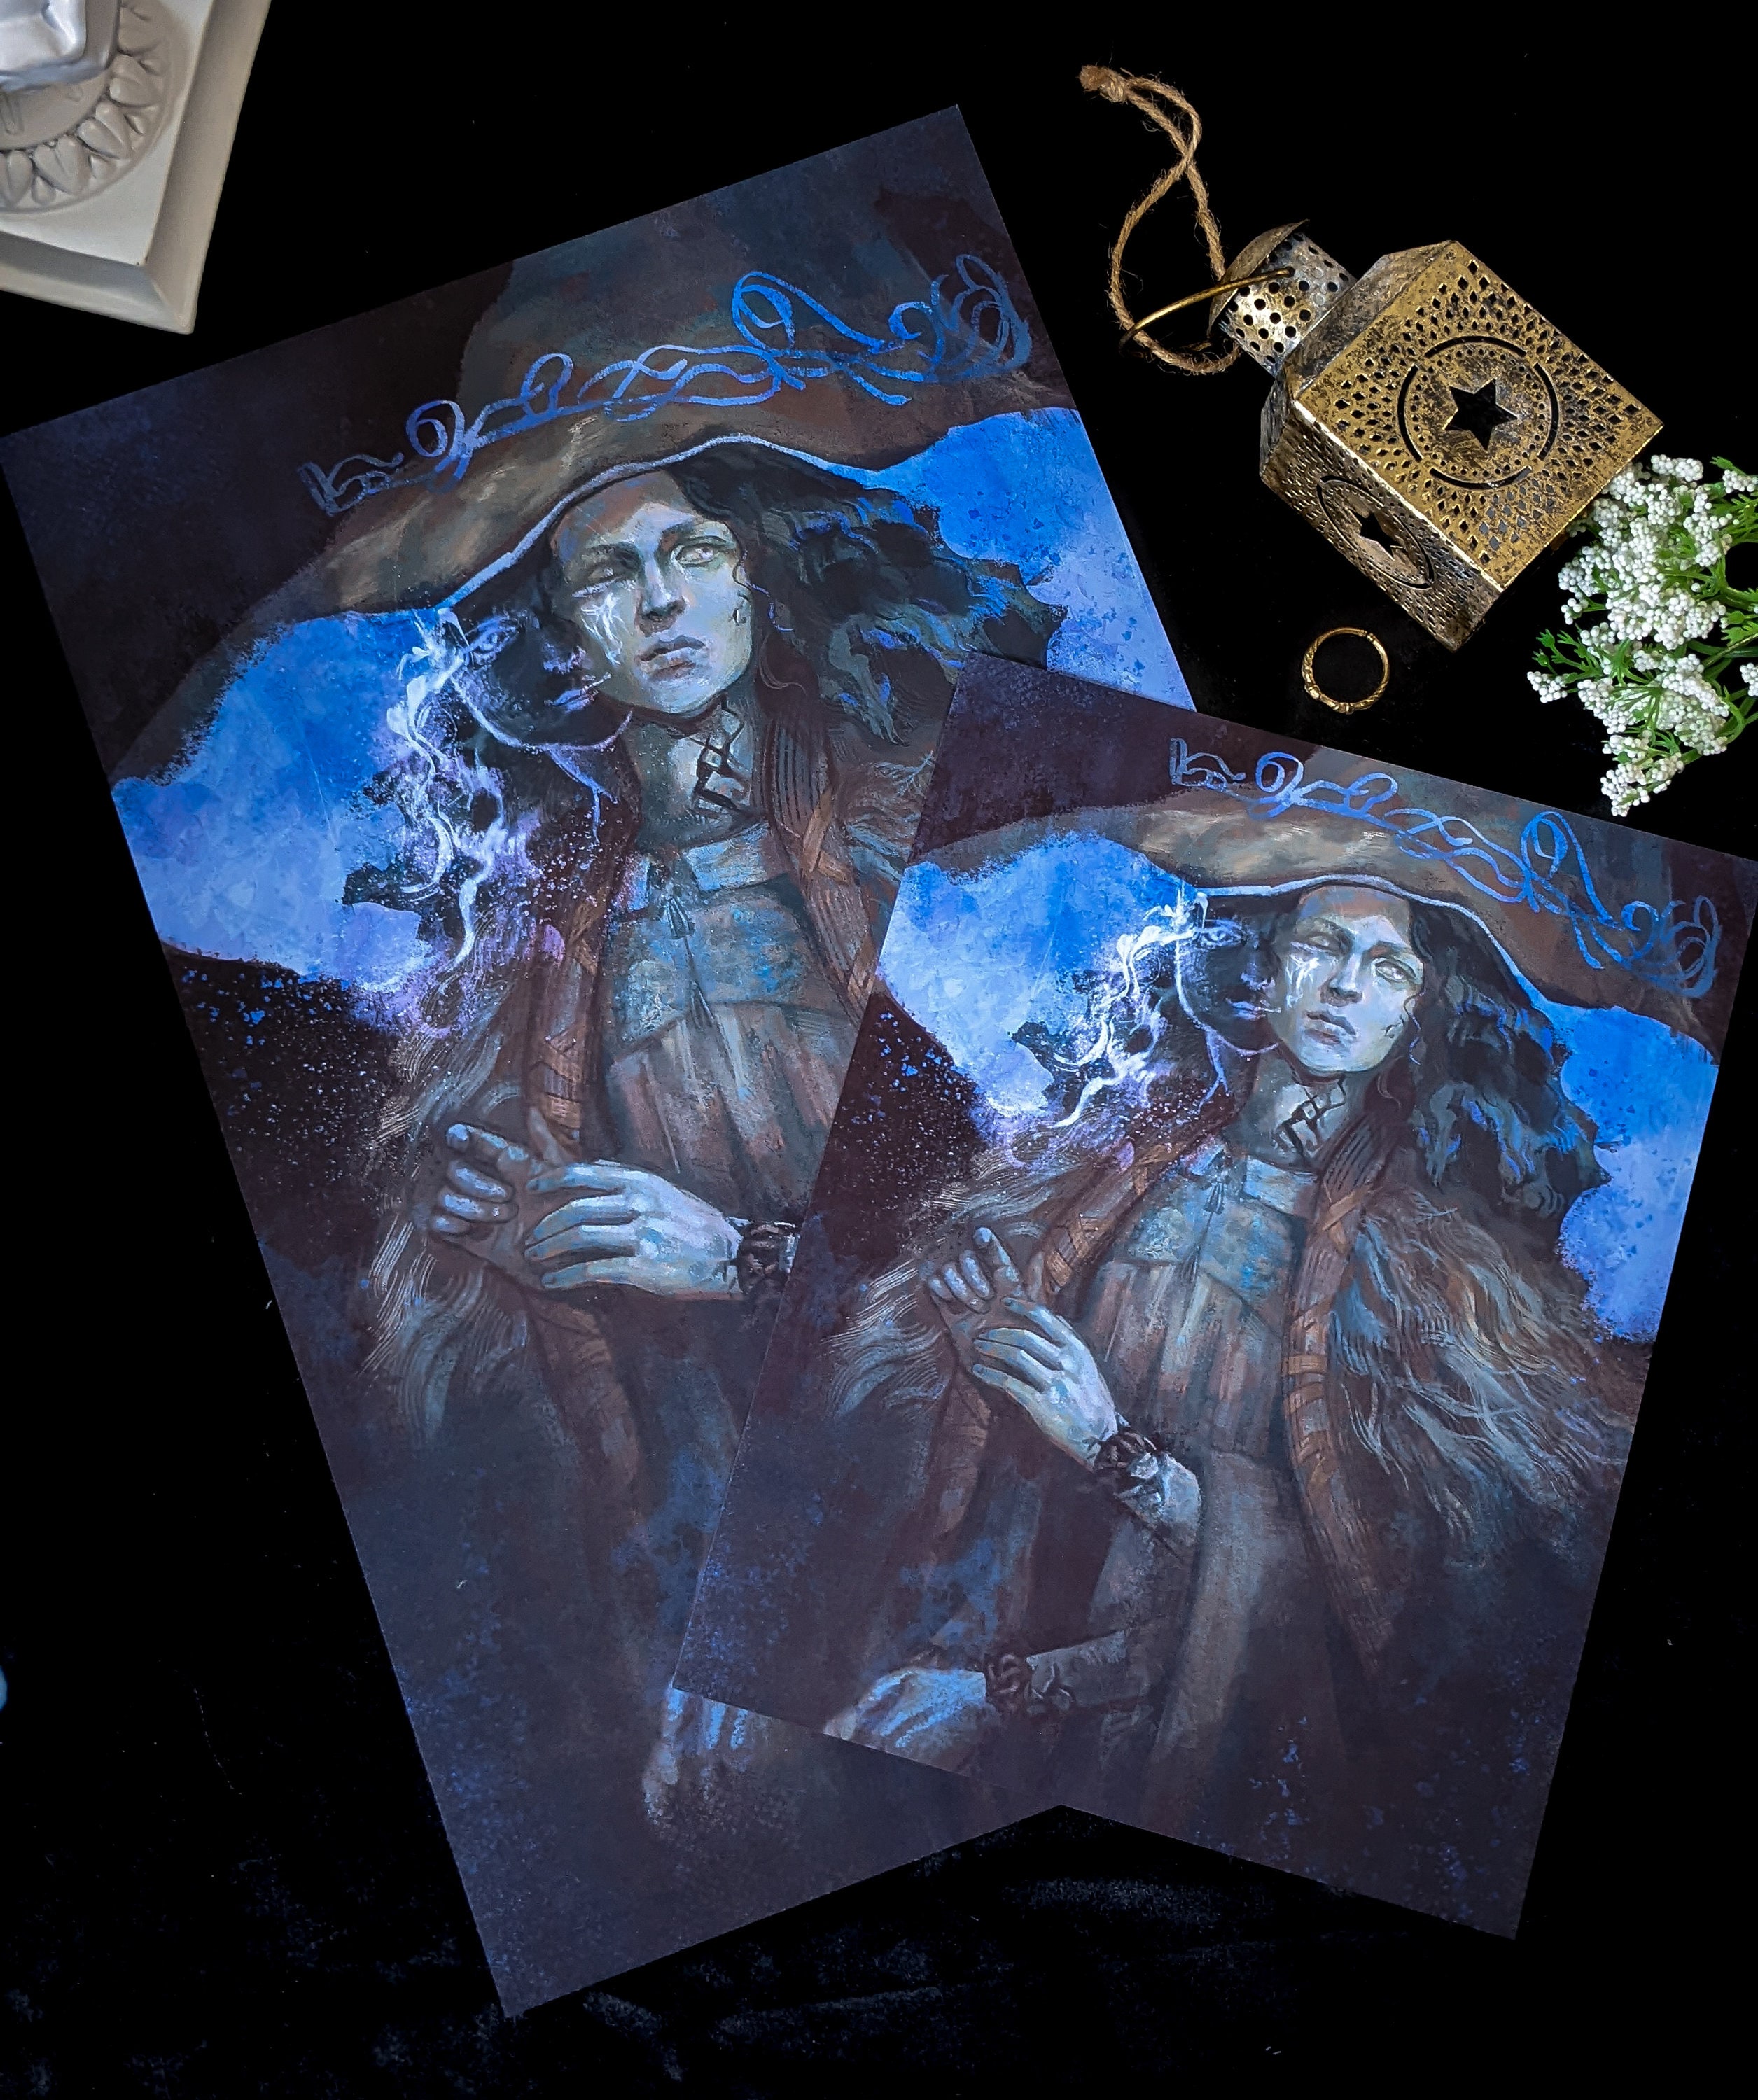 Ranni the Witch (Elden Ring), an art print by Rim_Jims - INPRNT